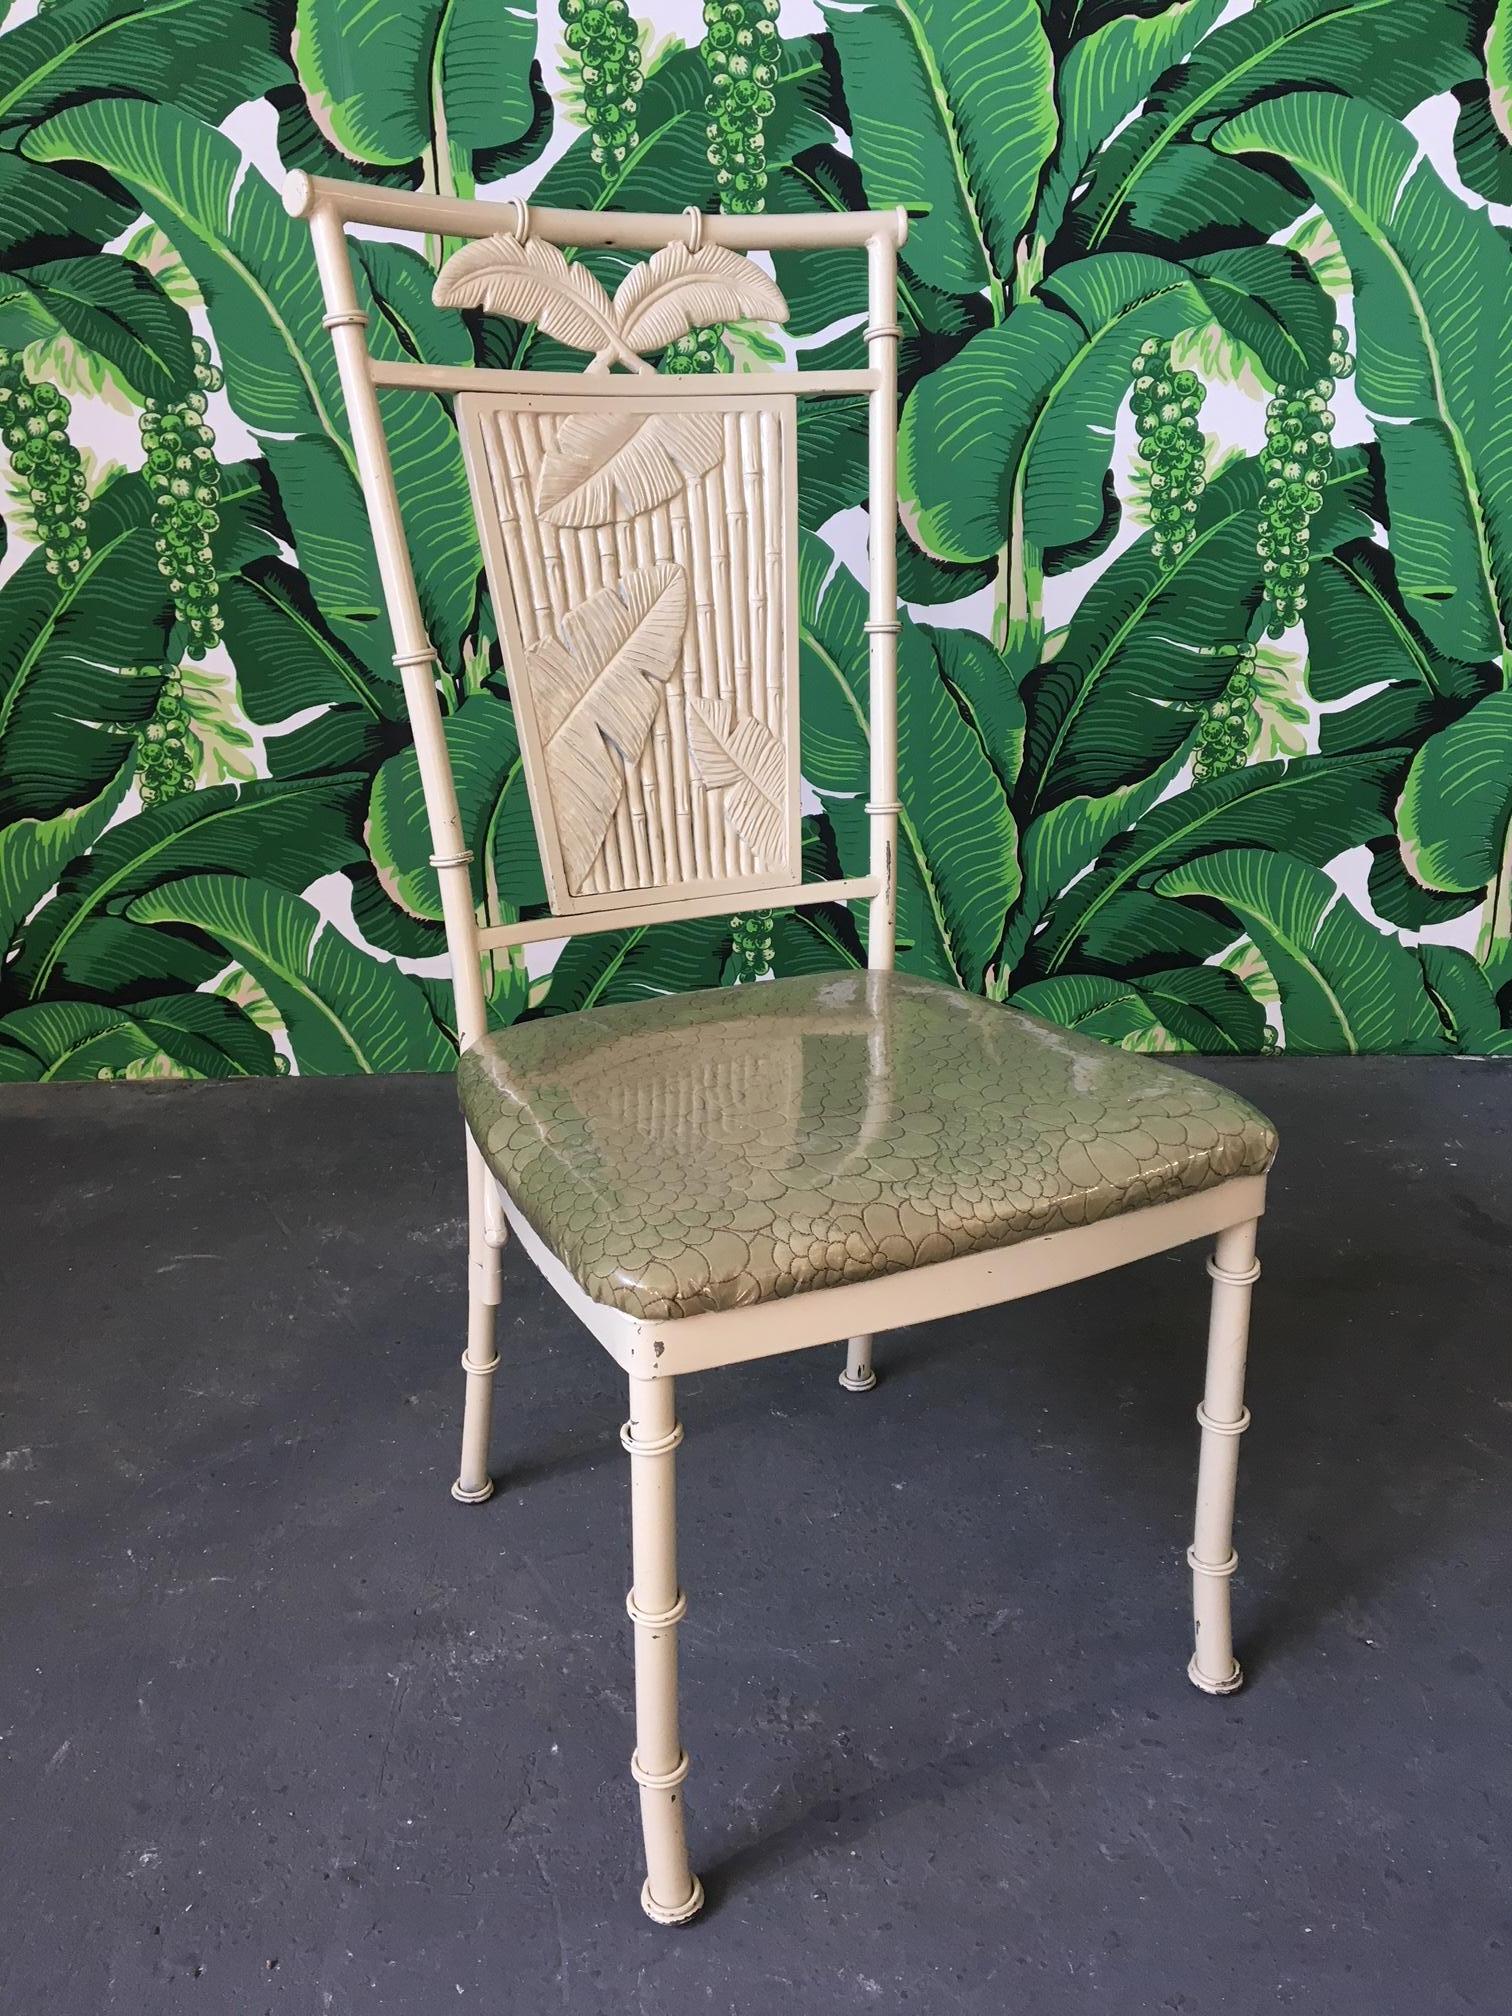 Set of four metal faux bamboo dining chairs with palm motif backs. Upholstered in green fabric with clear vinyl covering. Very heavy and solid with a steel frame construction. Good vintage condition with chips to finish and minor cracks not